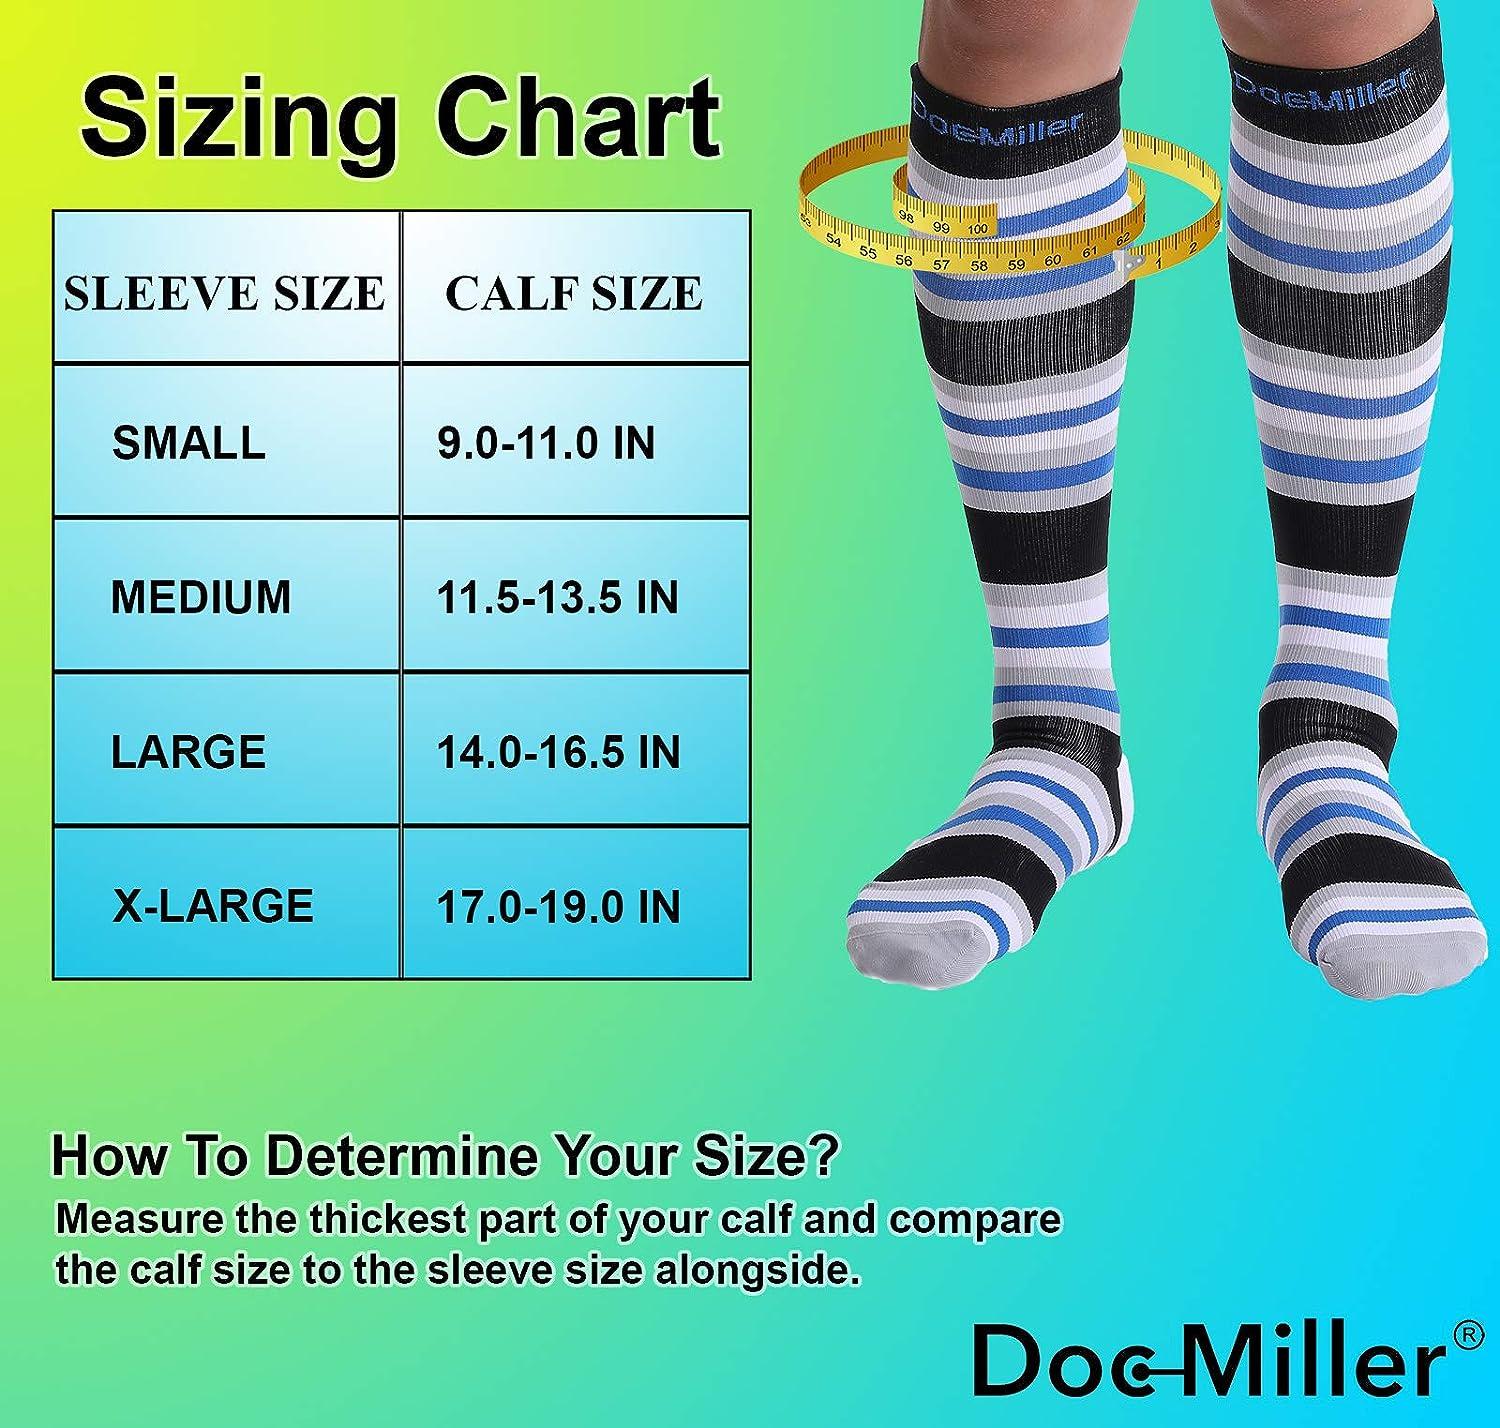 Doc Miller Compression Socks for Women and Men 15-20mmHg, Knee High Support  Socks for Recovery from Shin Splints, Swelling and Varicose Veins 1 Pair  Medium, Grey Stripes Gray Medium